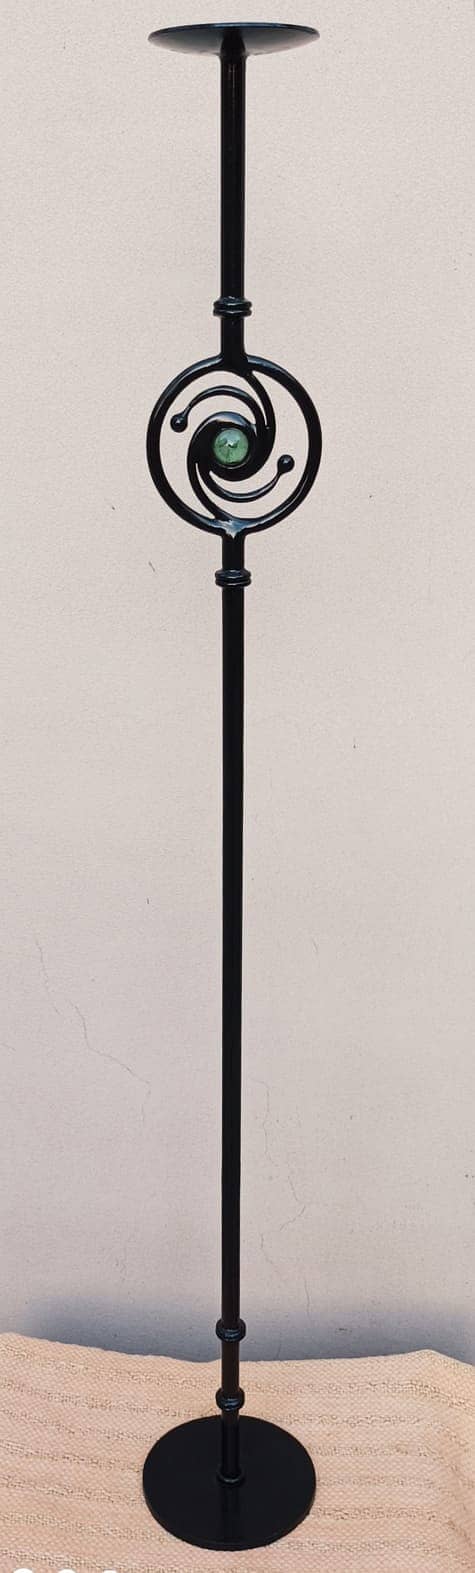 Steel / Wrought Iron Candle Stands on sale 3